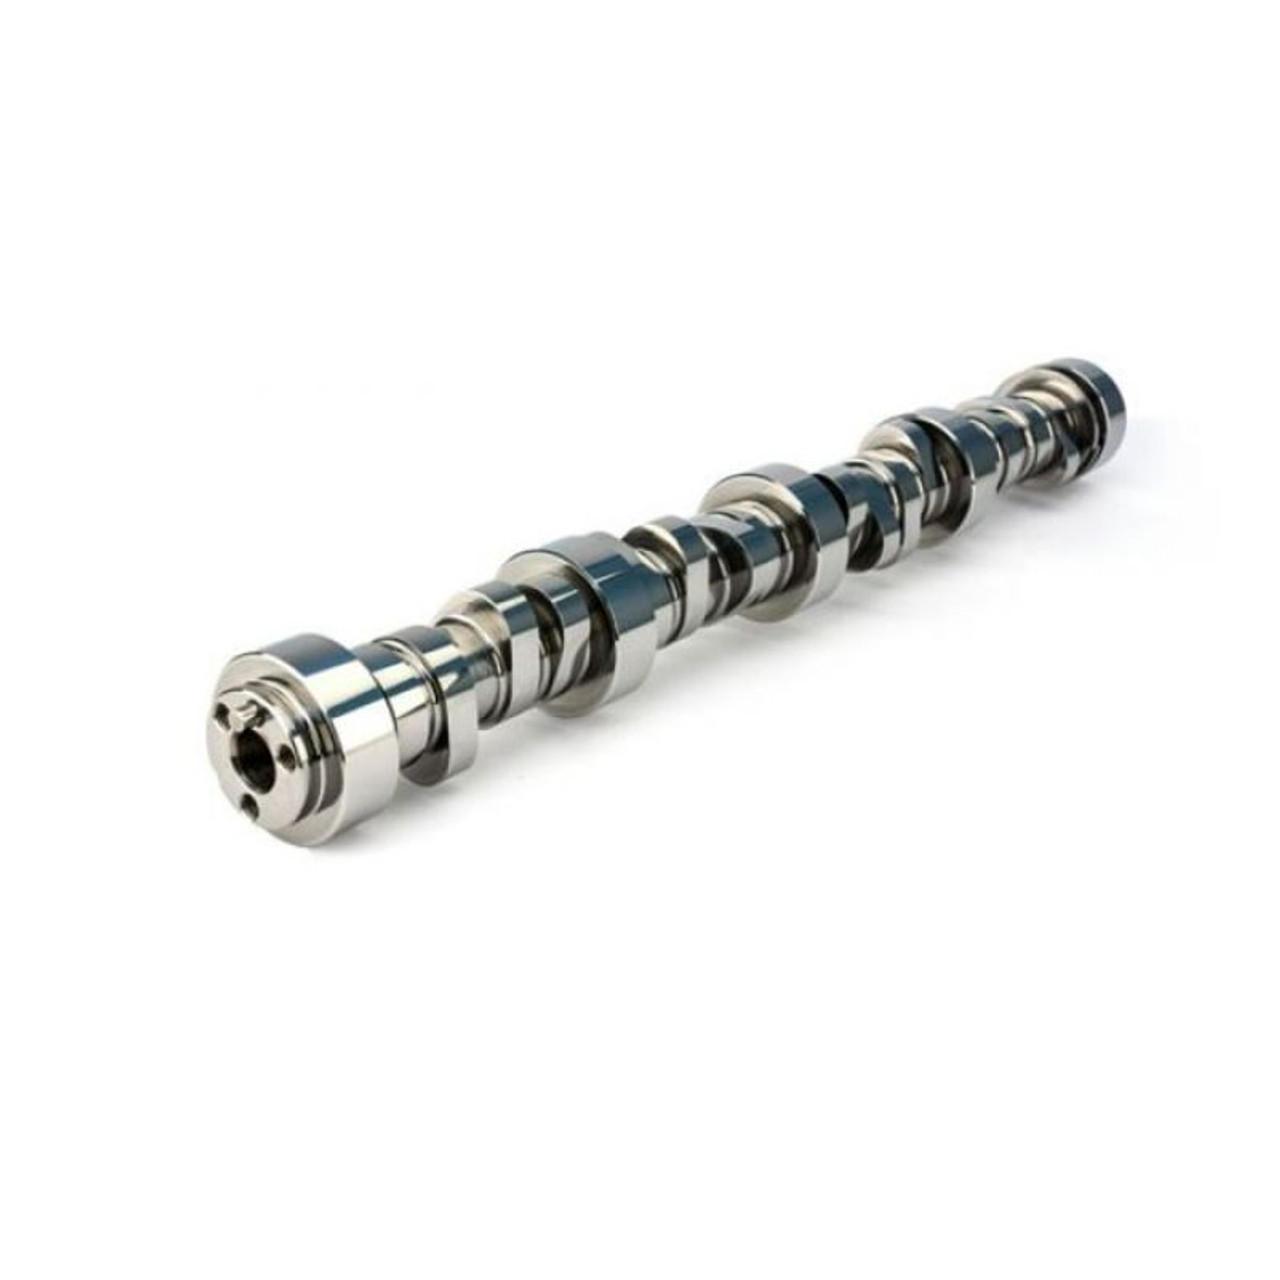 COMP Cams GM LS3/LS4 HV Series Camshaft - 54-273-11 Photo - Primary